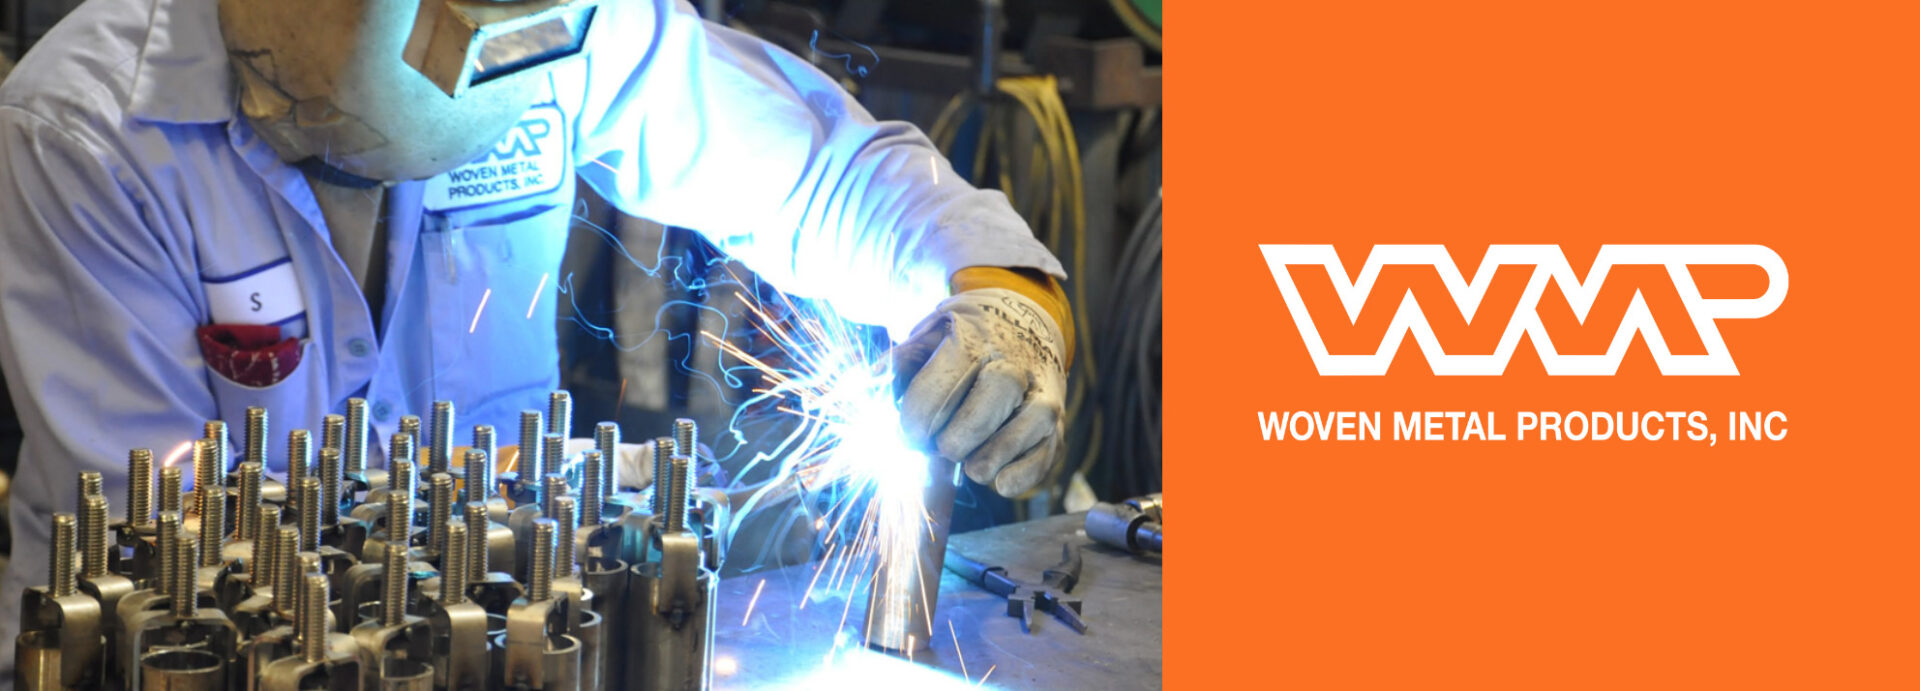 Our Welders' Voices: National Welding Month